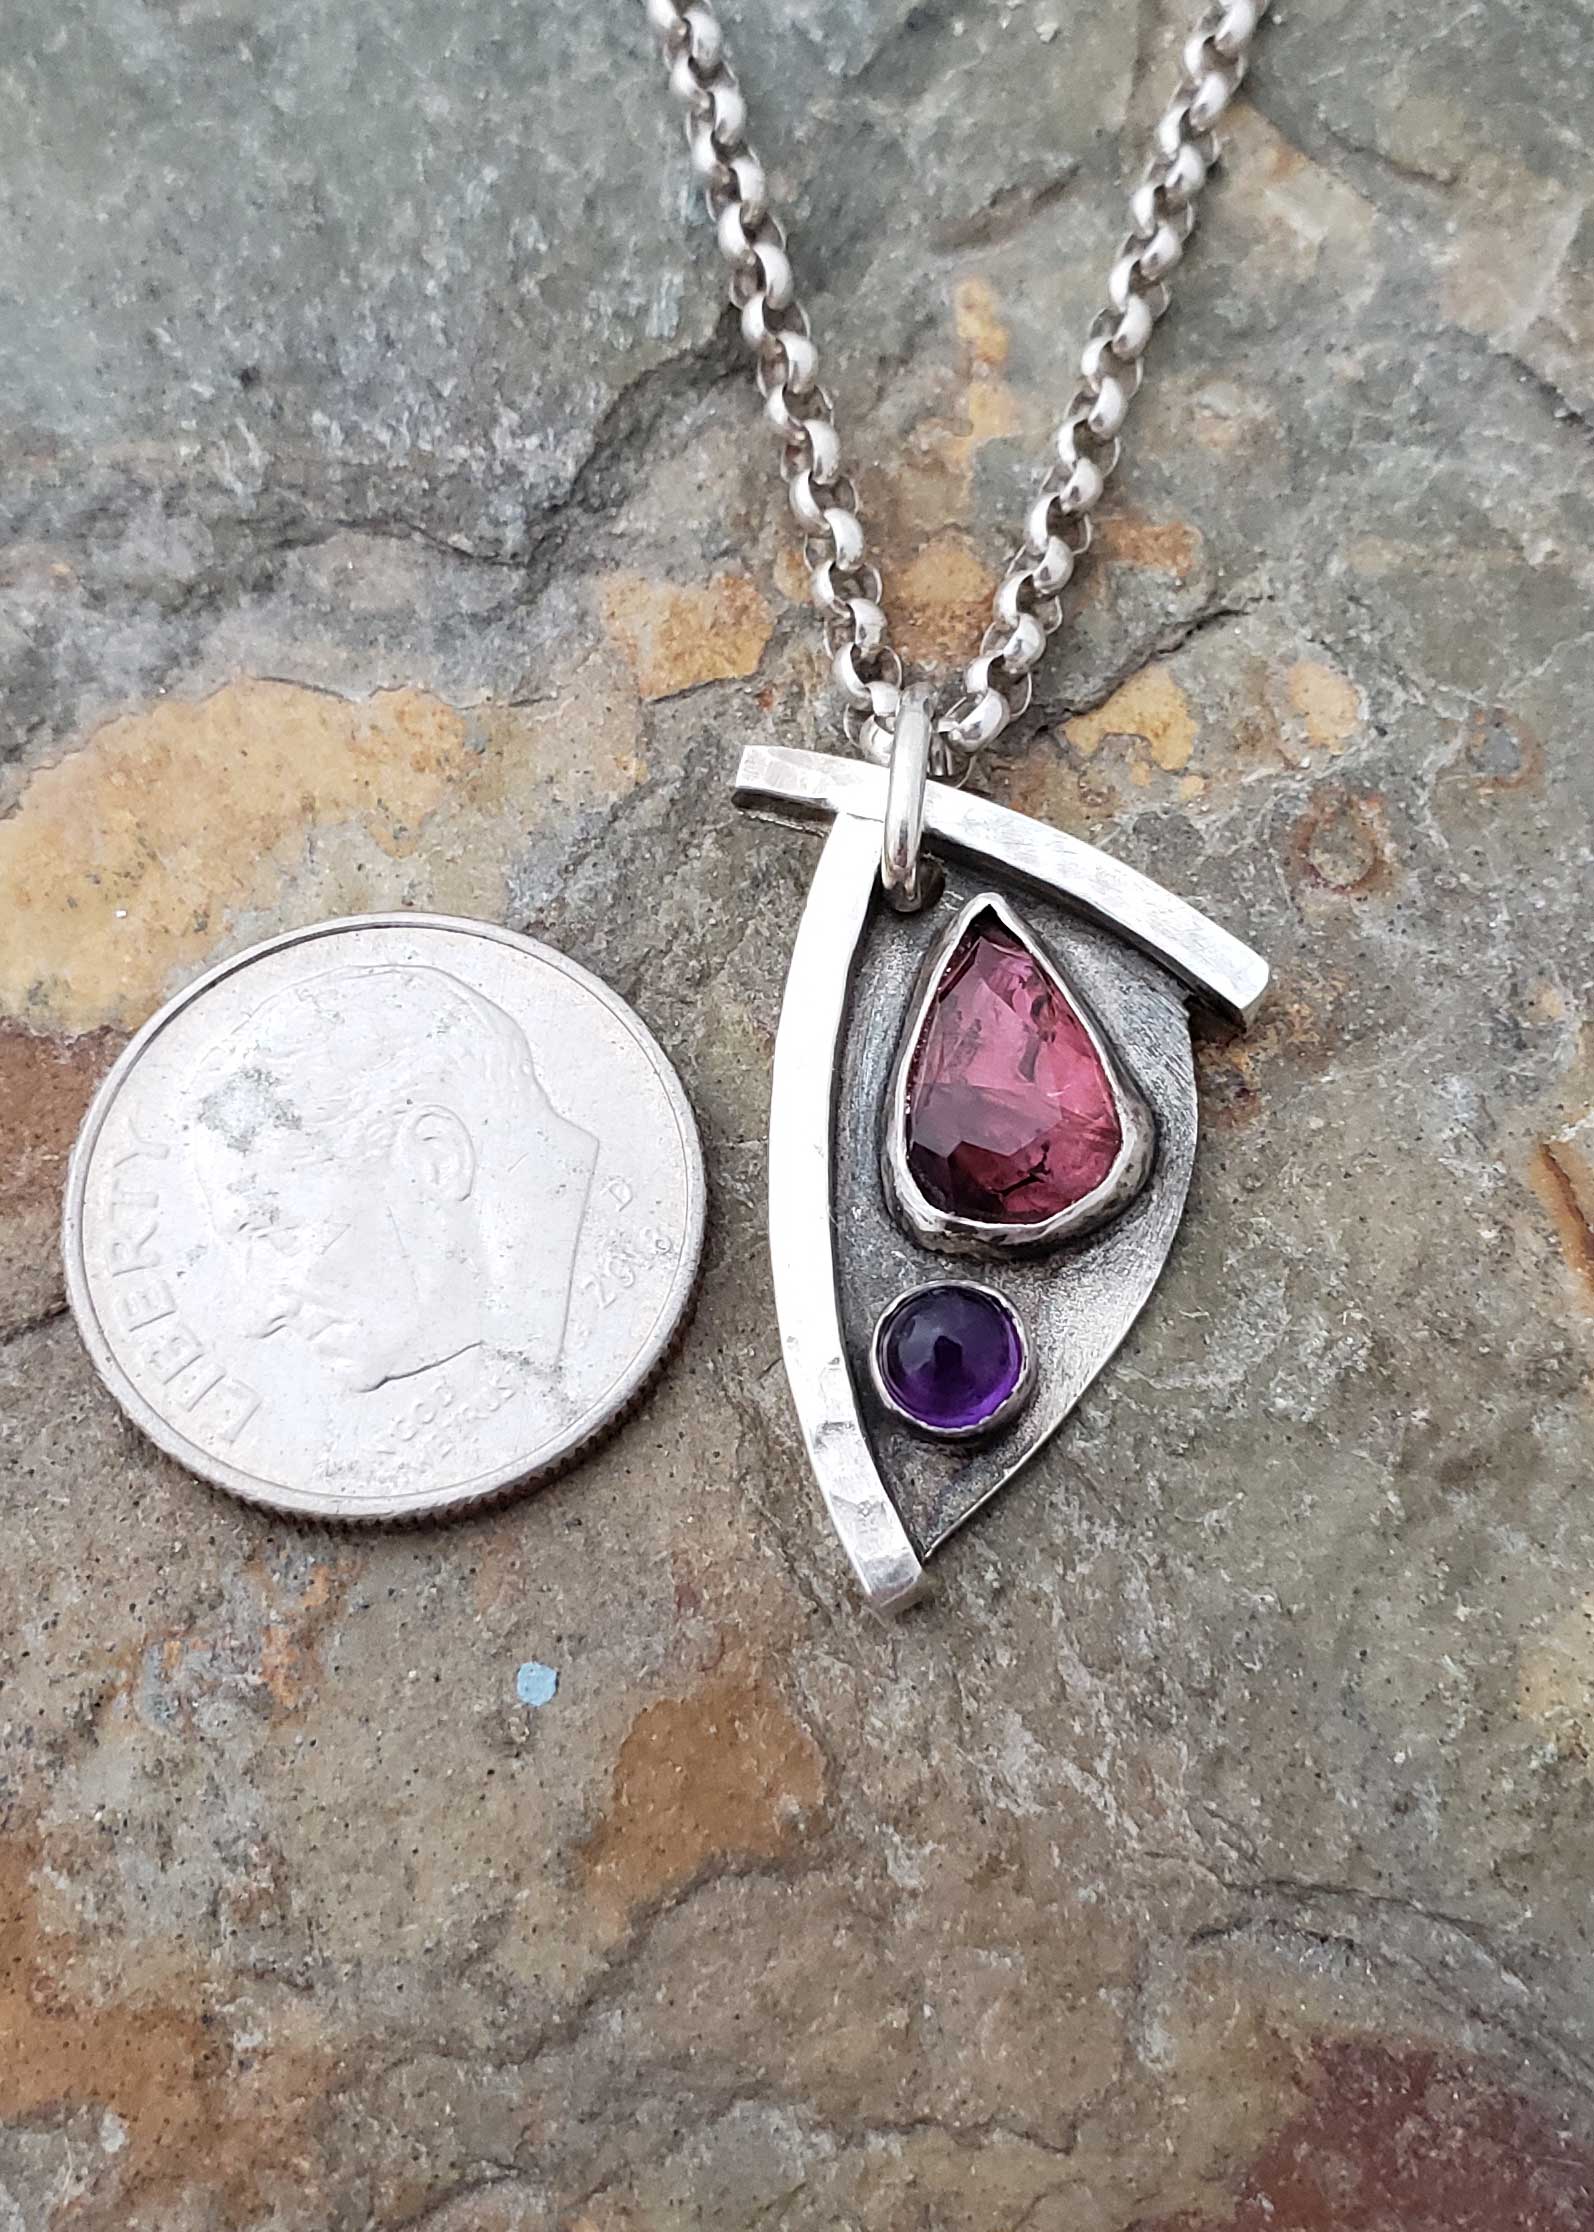 pinks and purples in this petite pendant, by Dona Miller